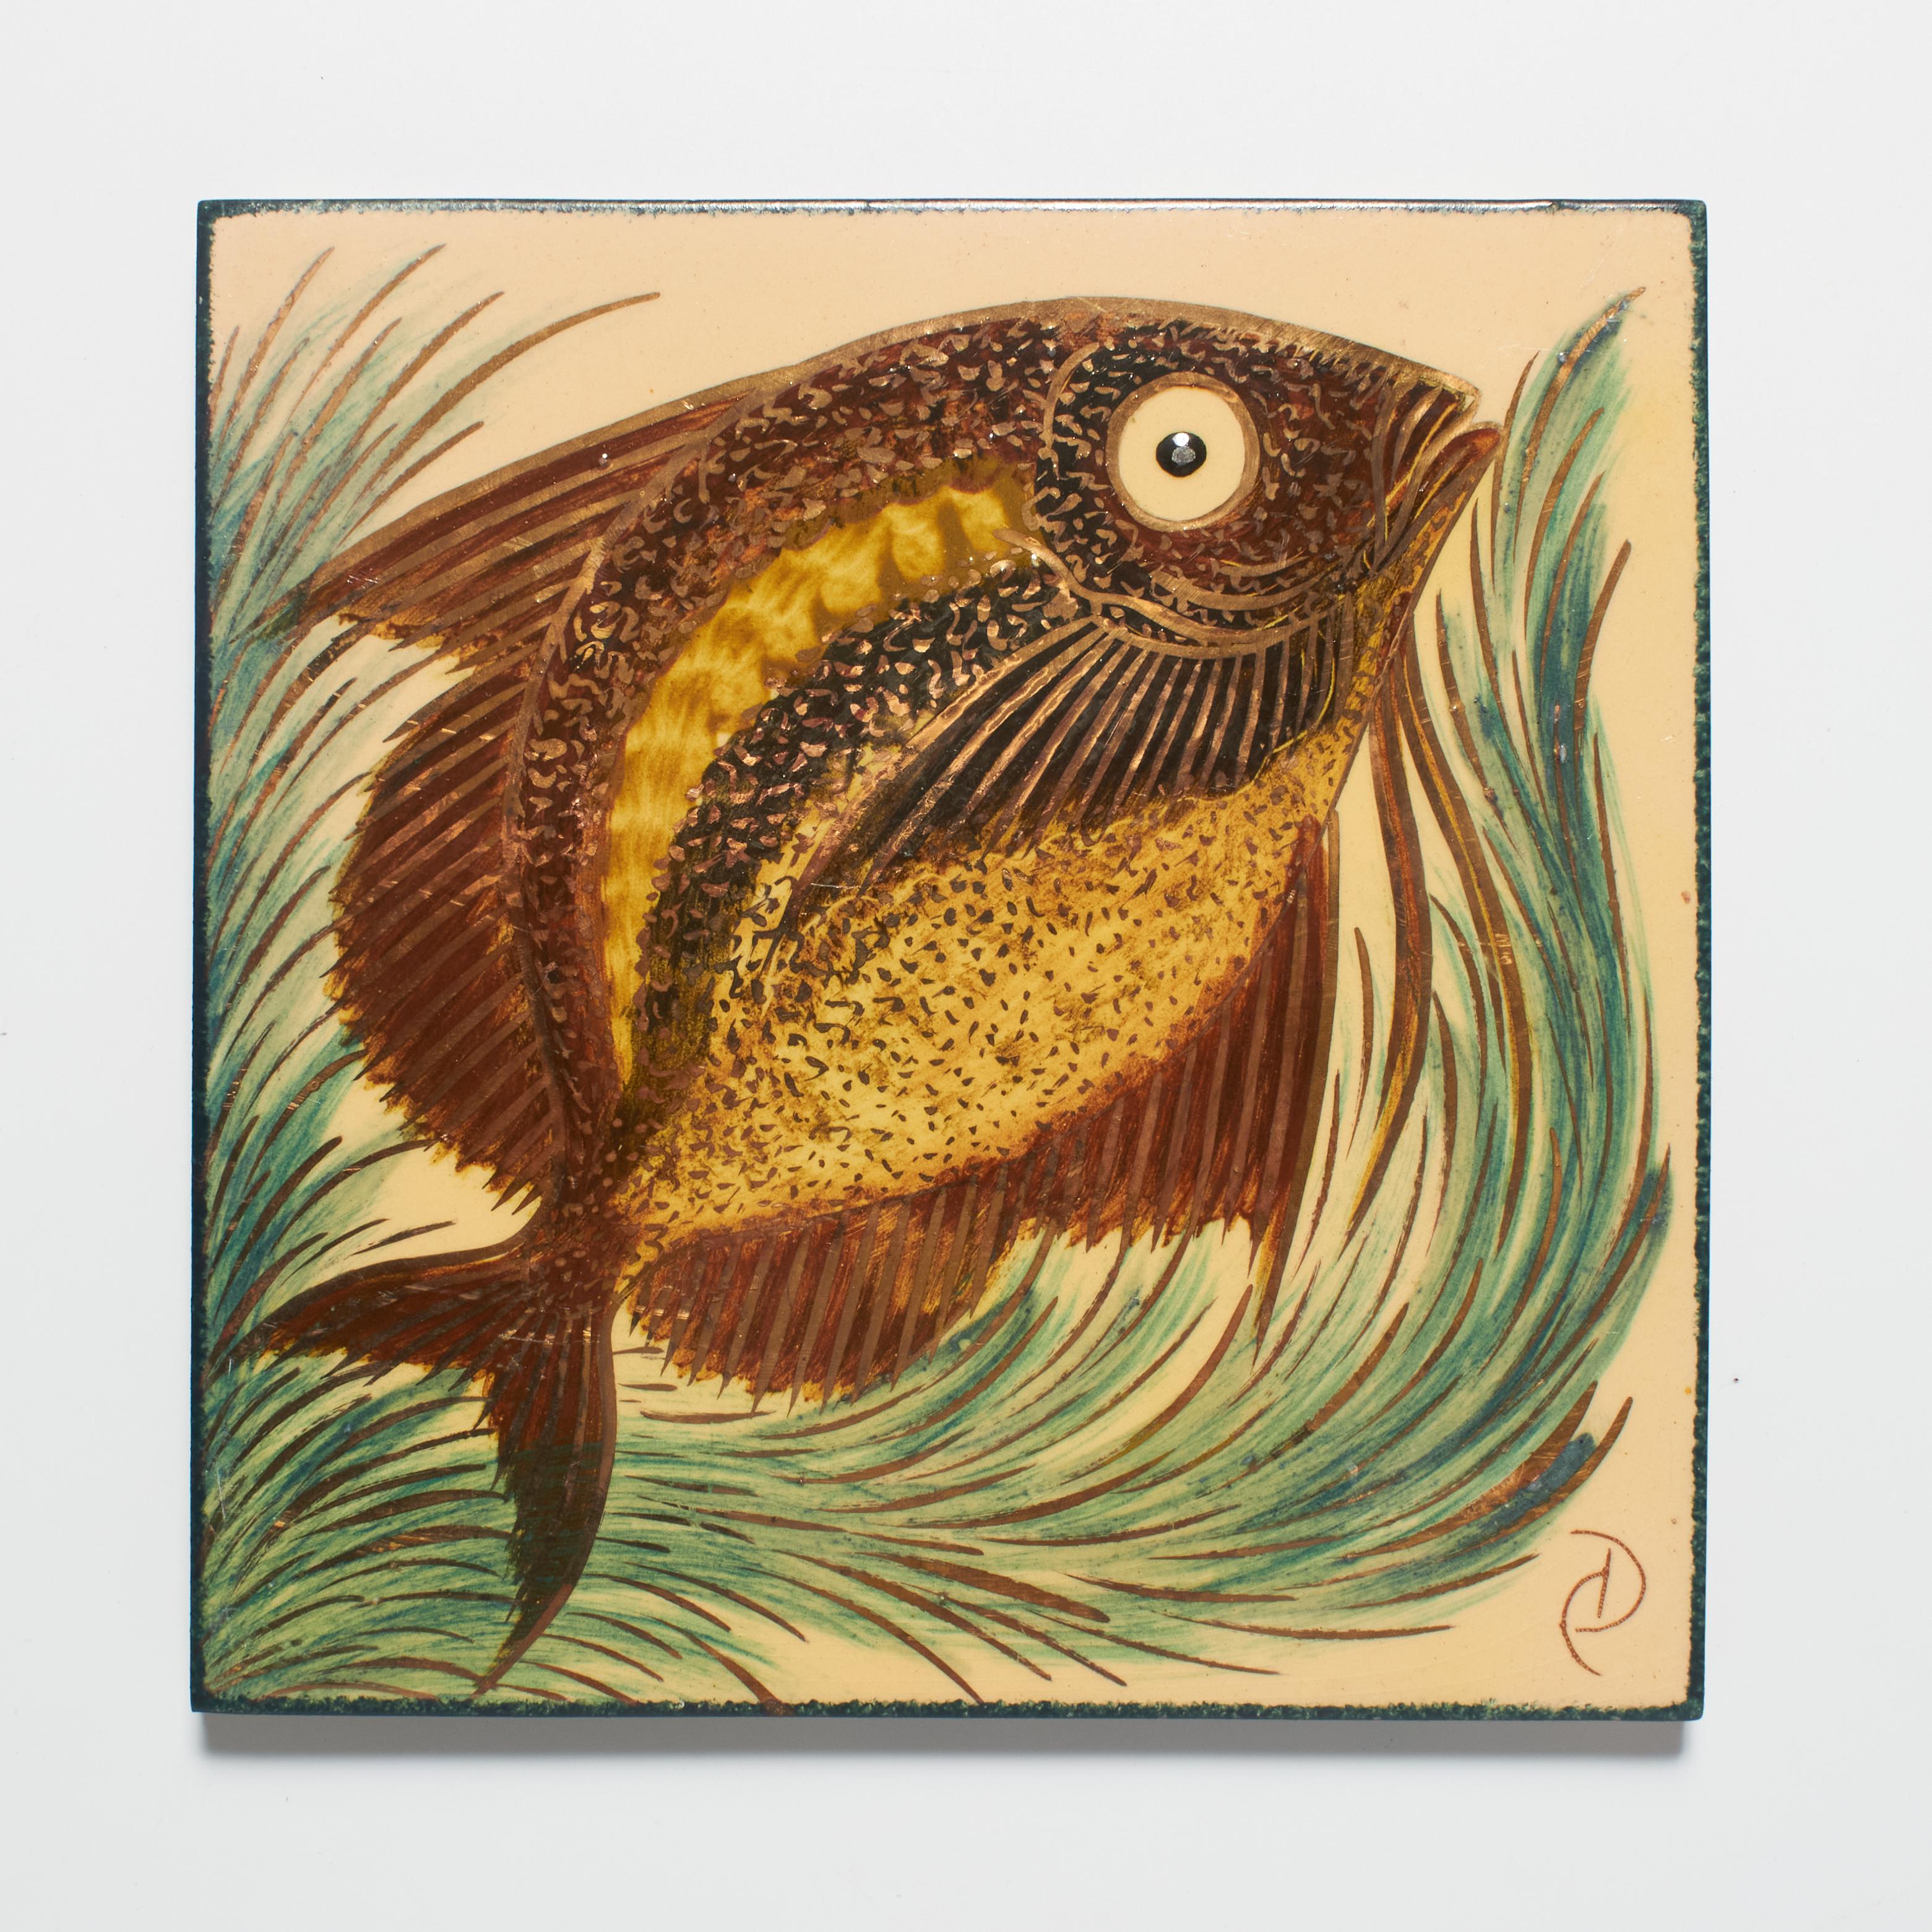 Immerse yourself in the aquatic allure of Catalan artist Diaz Costa with our vintage hand-painted ceramic artwork featuring a captivating fish design, circa 1960. This exceptional piece, framed and signed by the artist, adds a touch of opulence with